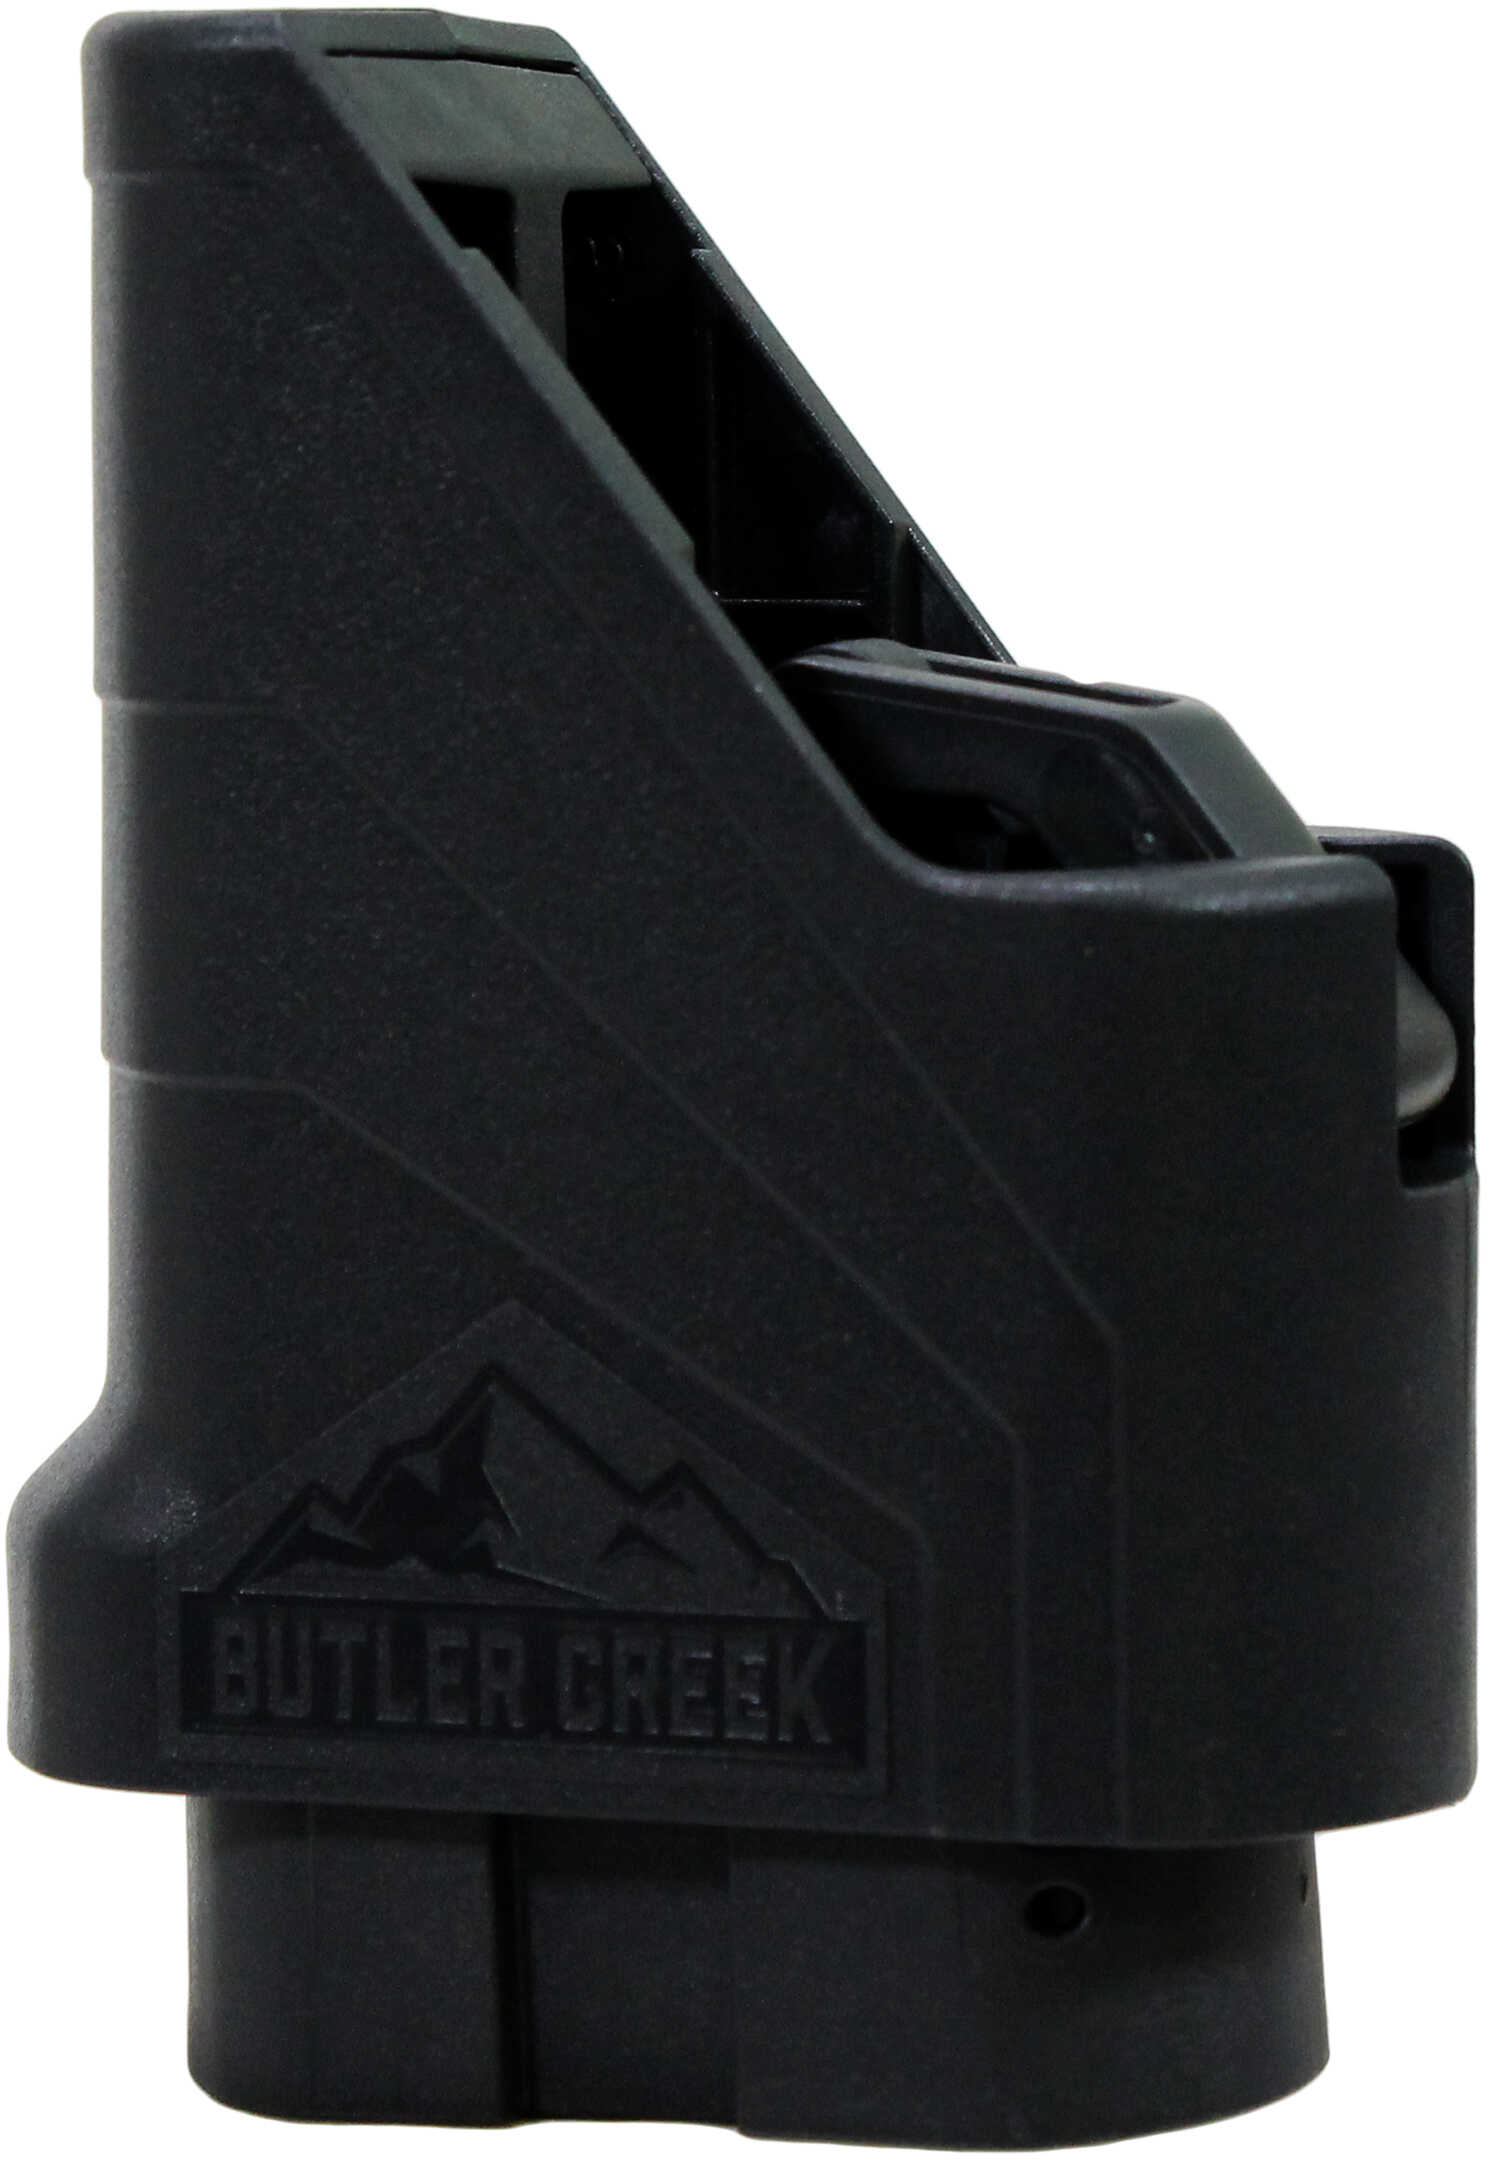 380/45 ACP Asap Universal Double Stack Magazine Loader